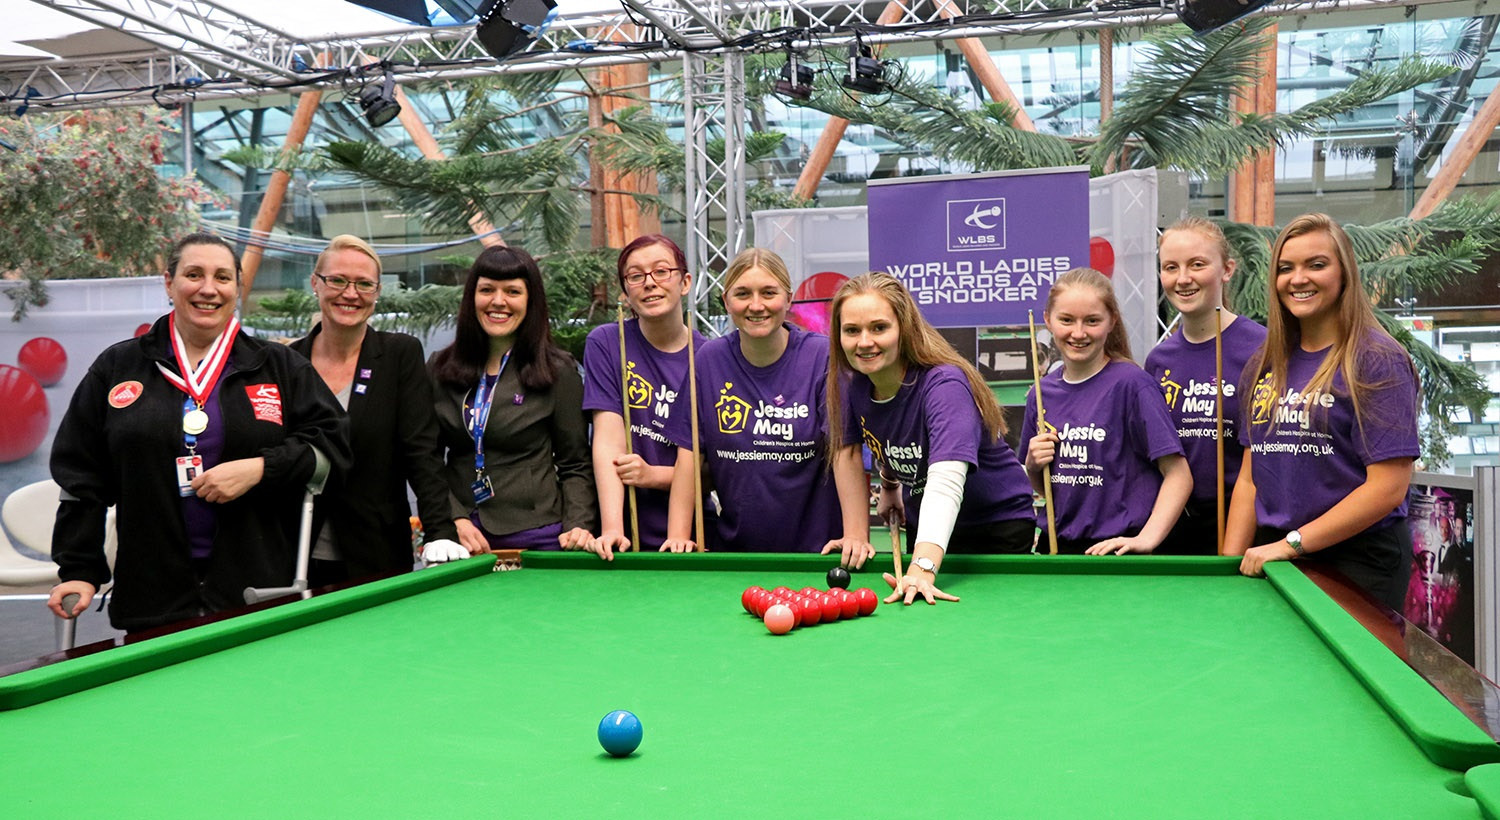 Women's snooker to be showcased in Sheffield